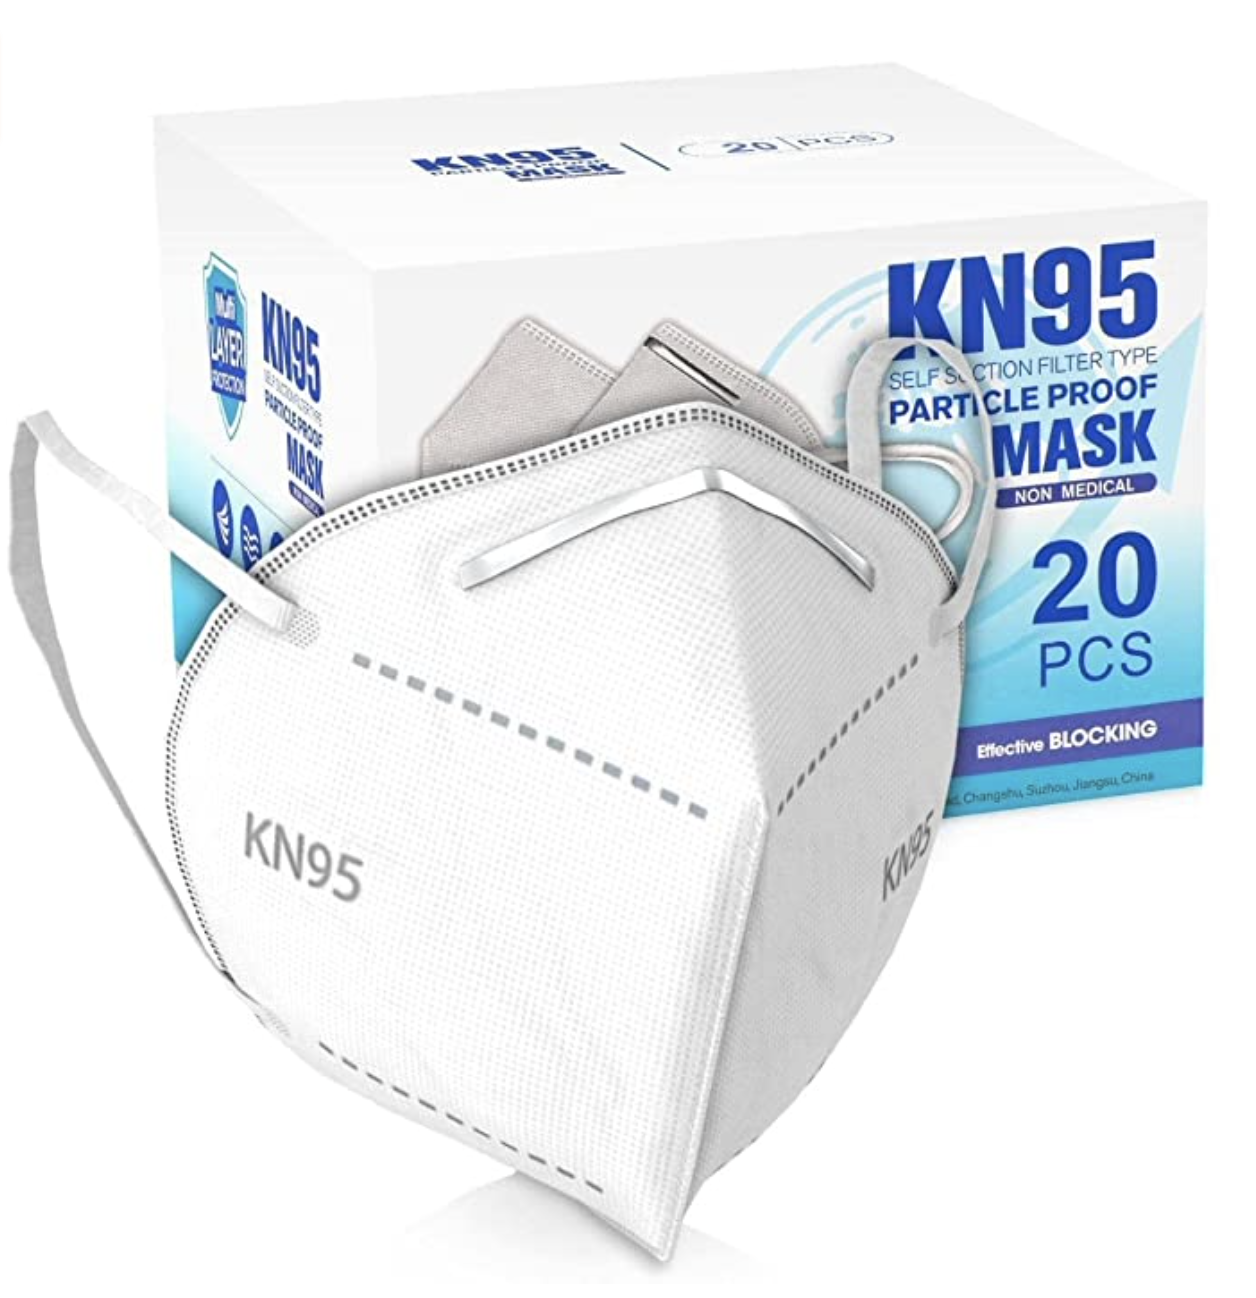 Amazon: KN 95 Disposable Face Masks (20 pack) for .99